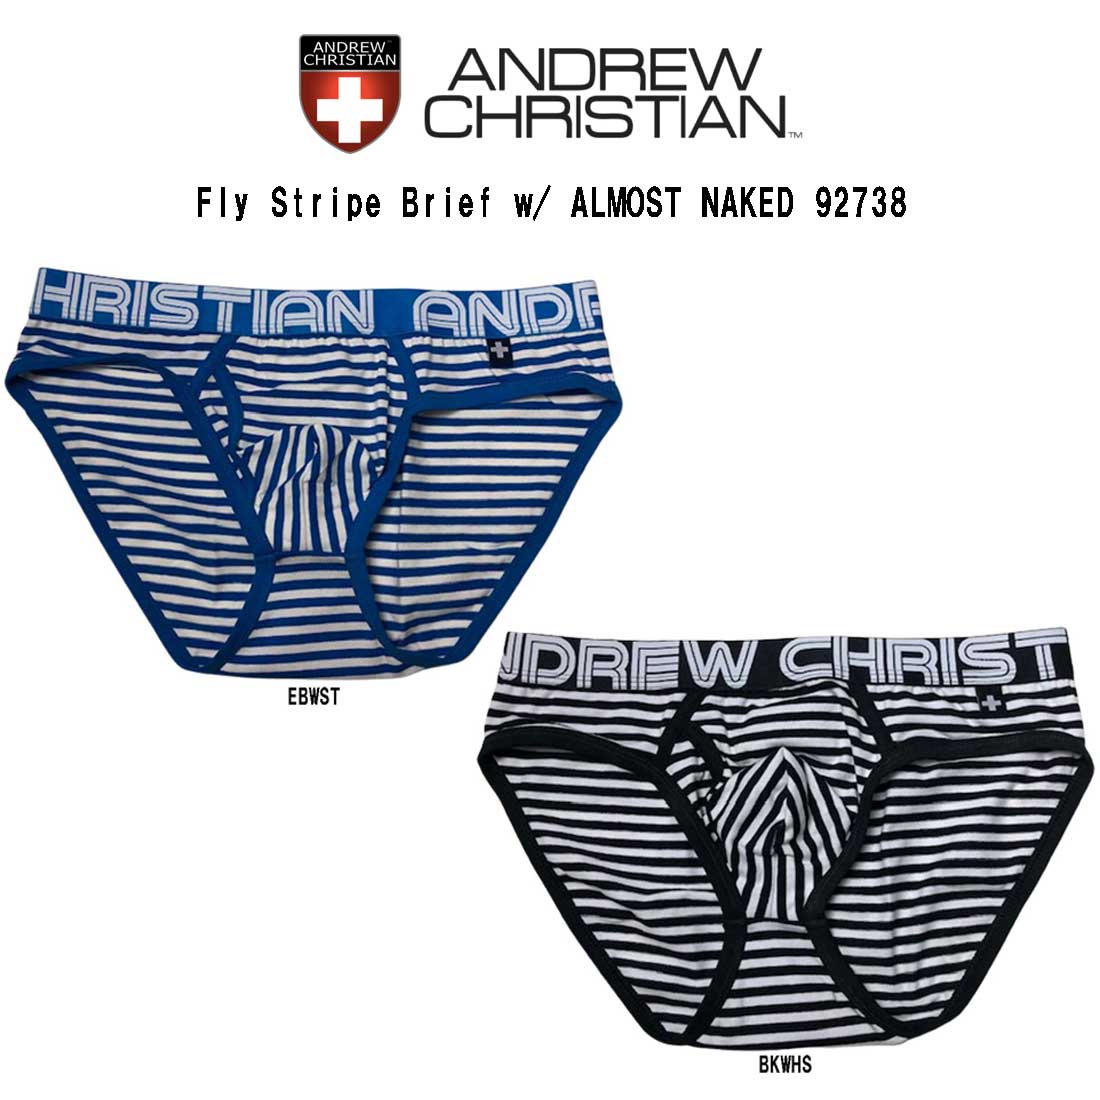 (SALE)ANDREW CHRISTIAN(アンドリュークリスチャン)ブリーフ メンズ 下着 Fly Stripe Brief w/ ALMOST NAKED 92738